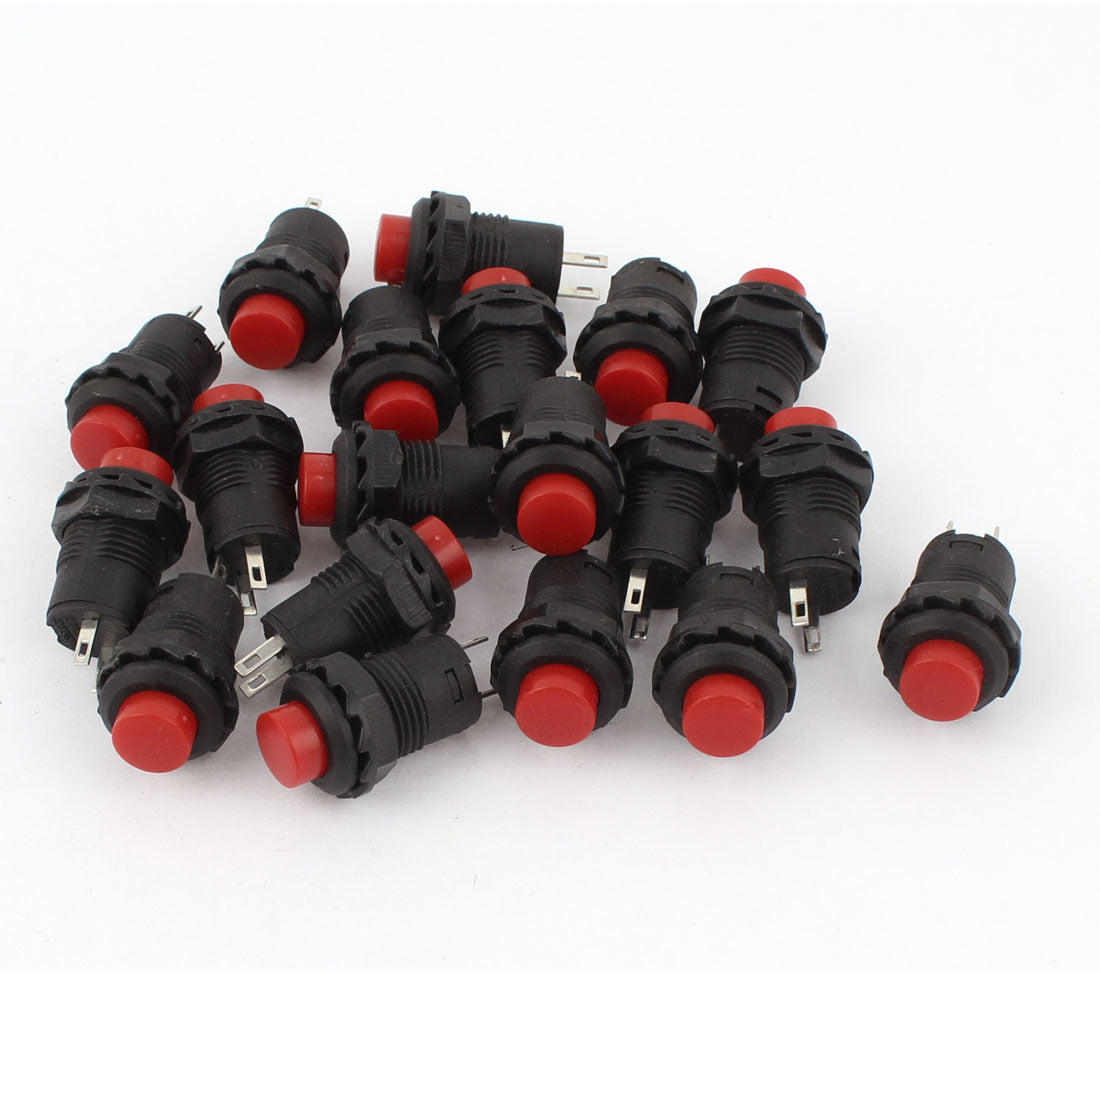 uxcell Uxcell AC 250V/1.5A 125V/3A Cap SPST Latching Round Push Button Switch 20 Pcs Red